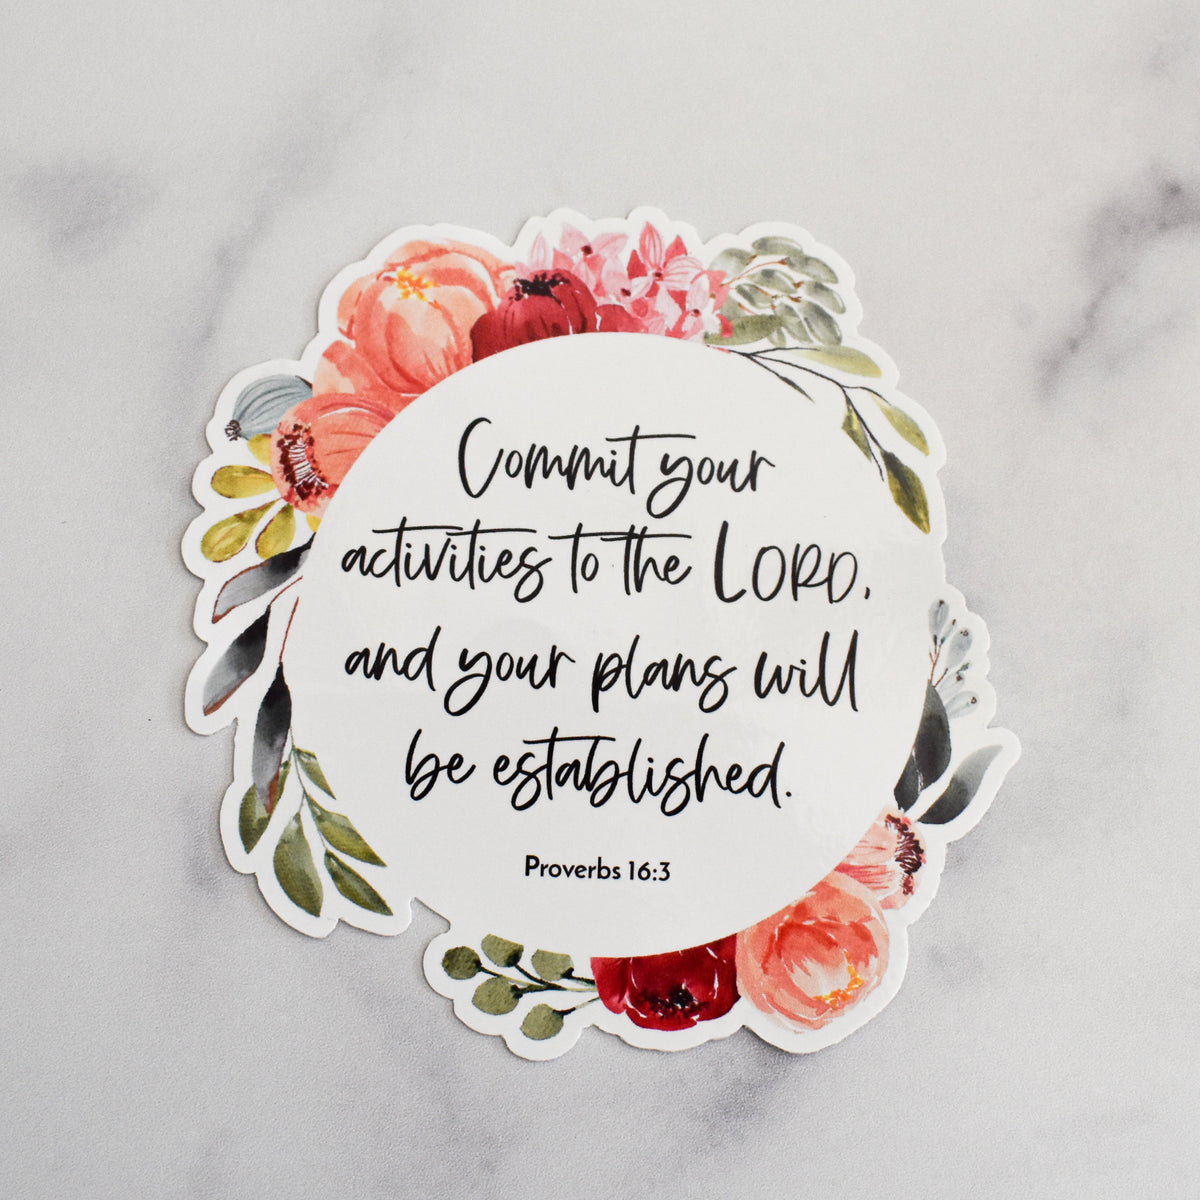 Inspirational Christian Stickers with Beautiful Flowers